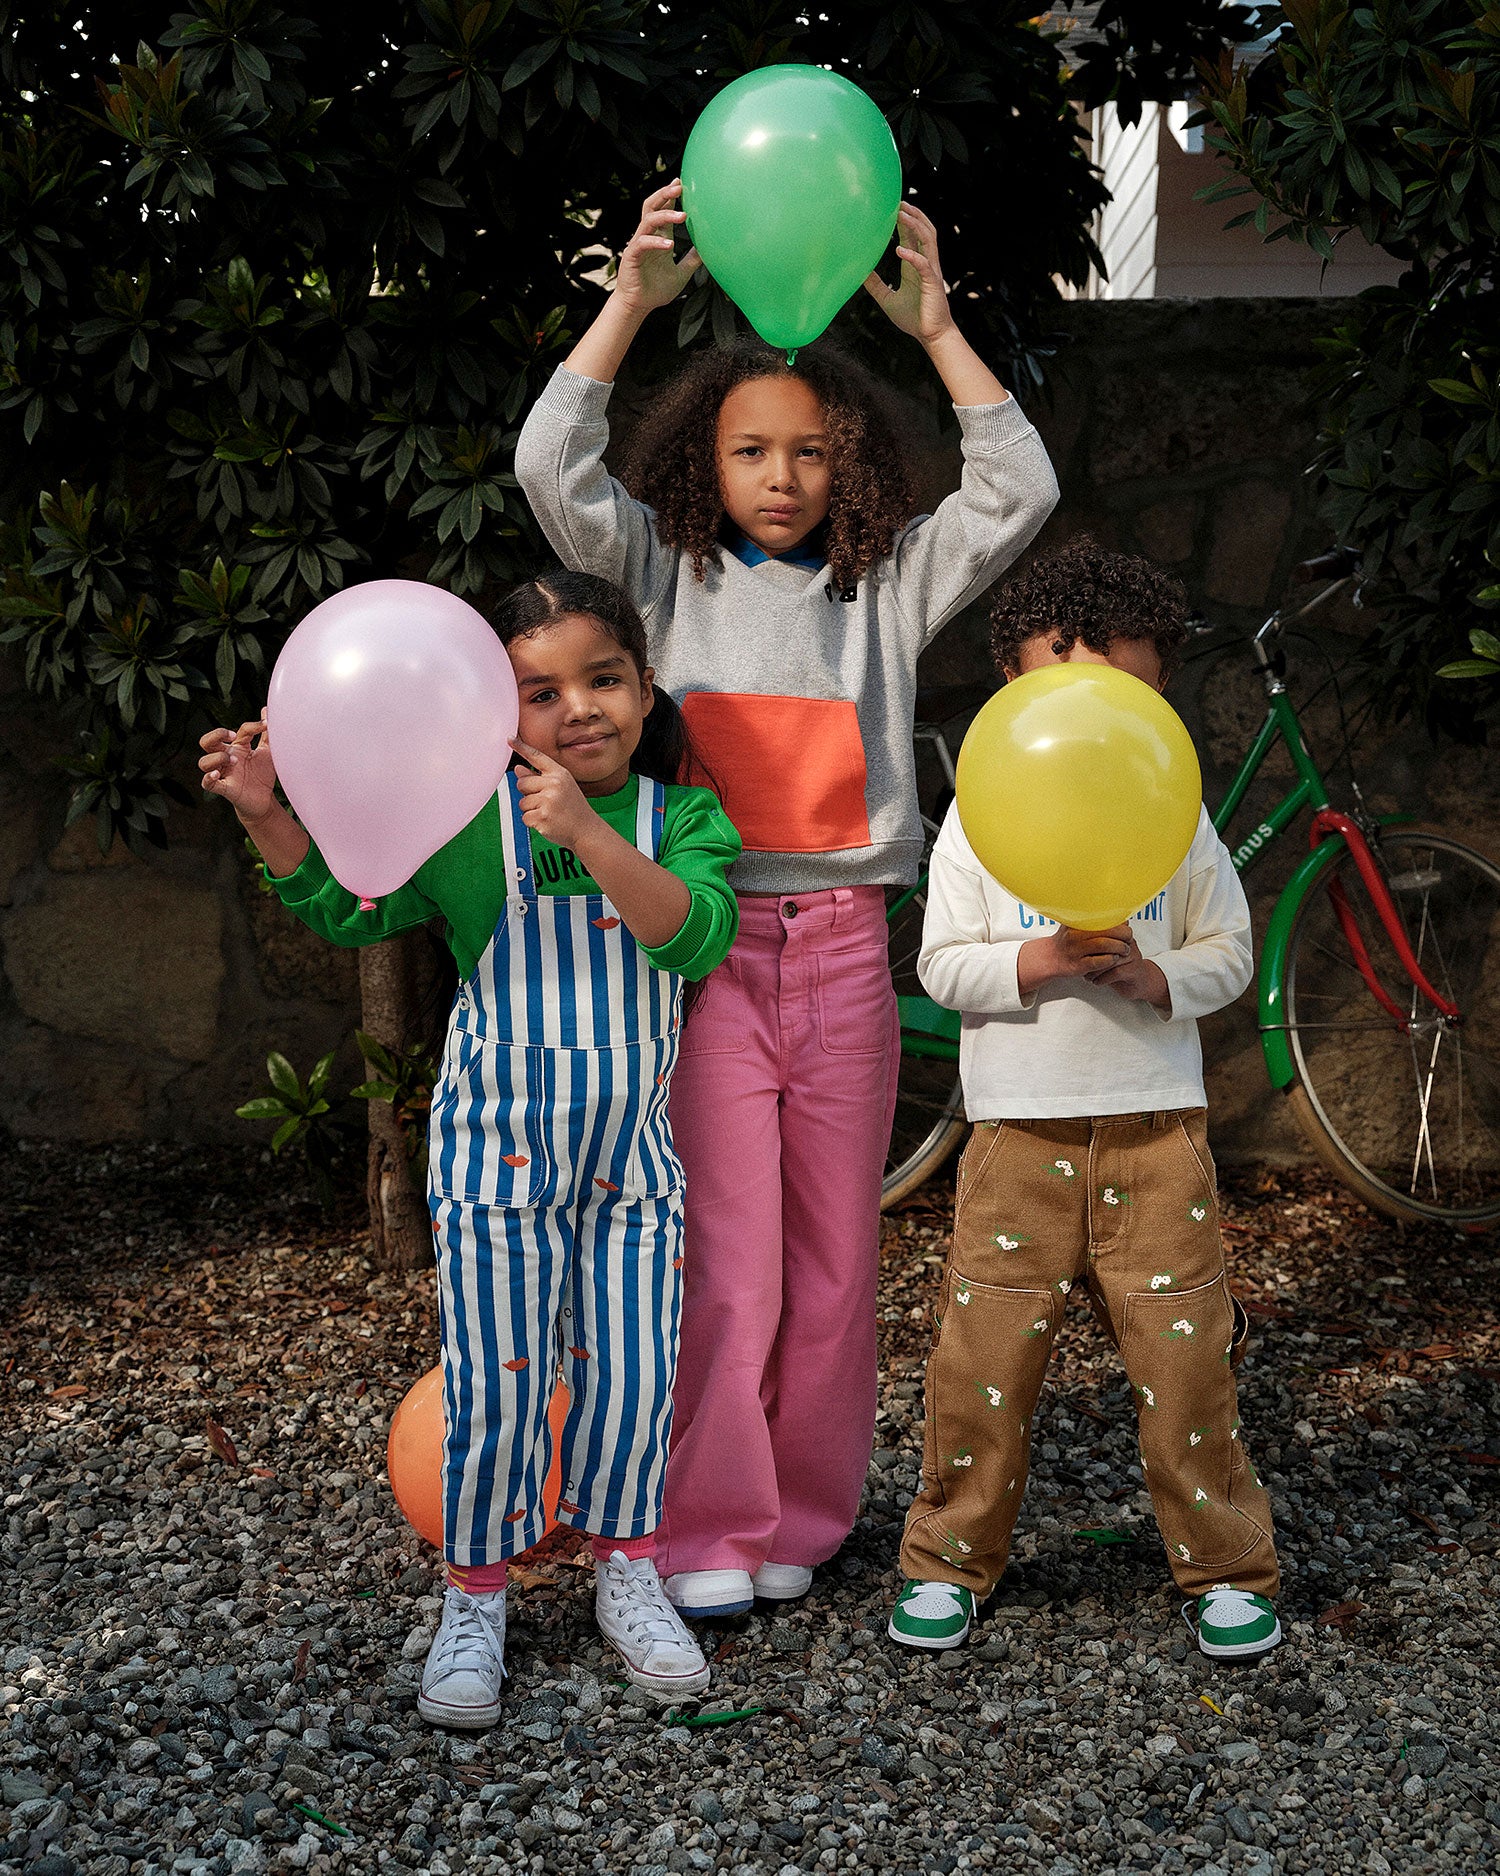 Group of kids playing with balloons. Child on the right wears the kids khaki pants